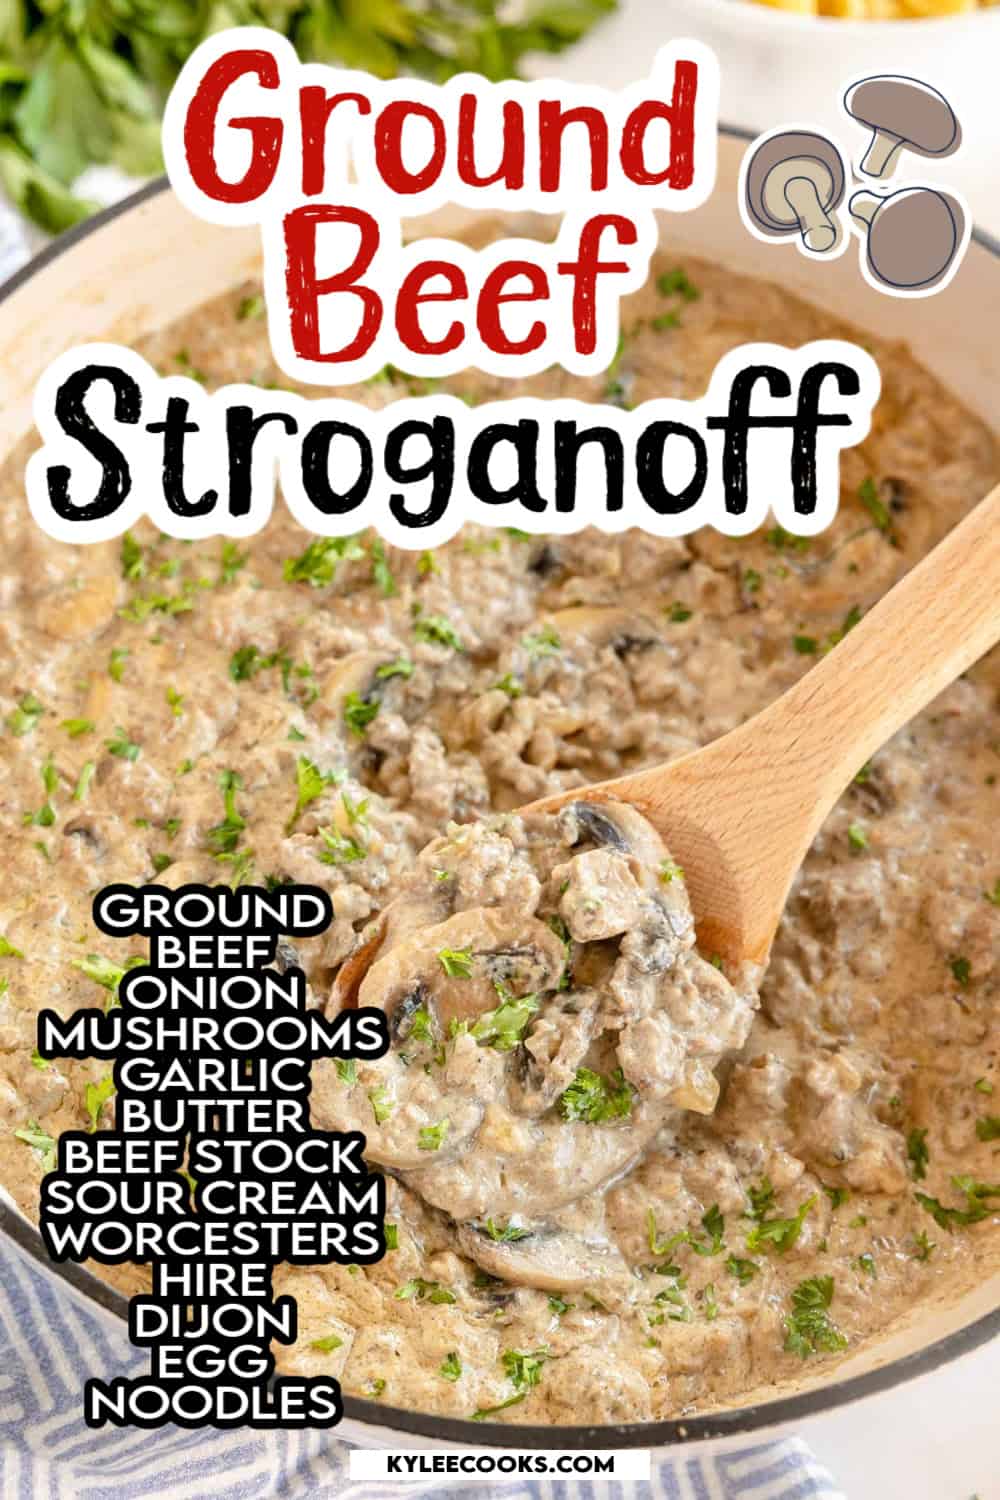 Ground beef stroganoff cooked in a pan with recipe name and ingredients listed overlaid in text.